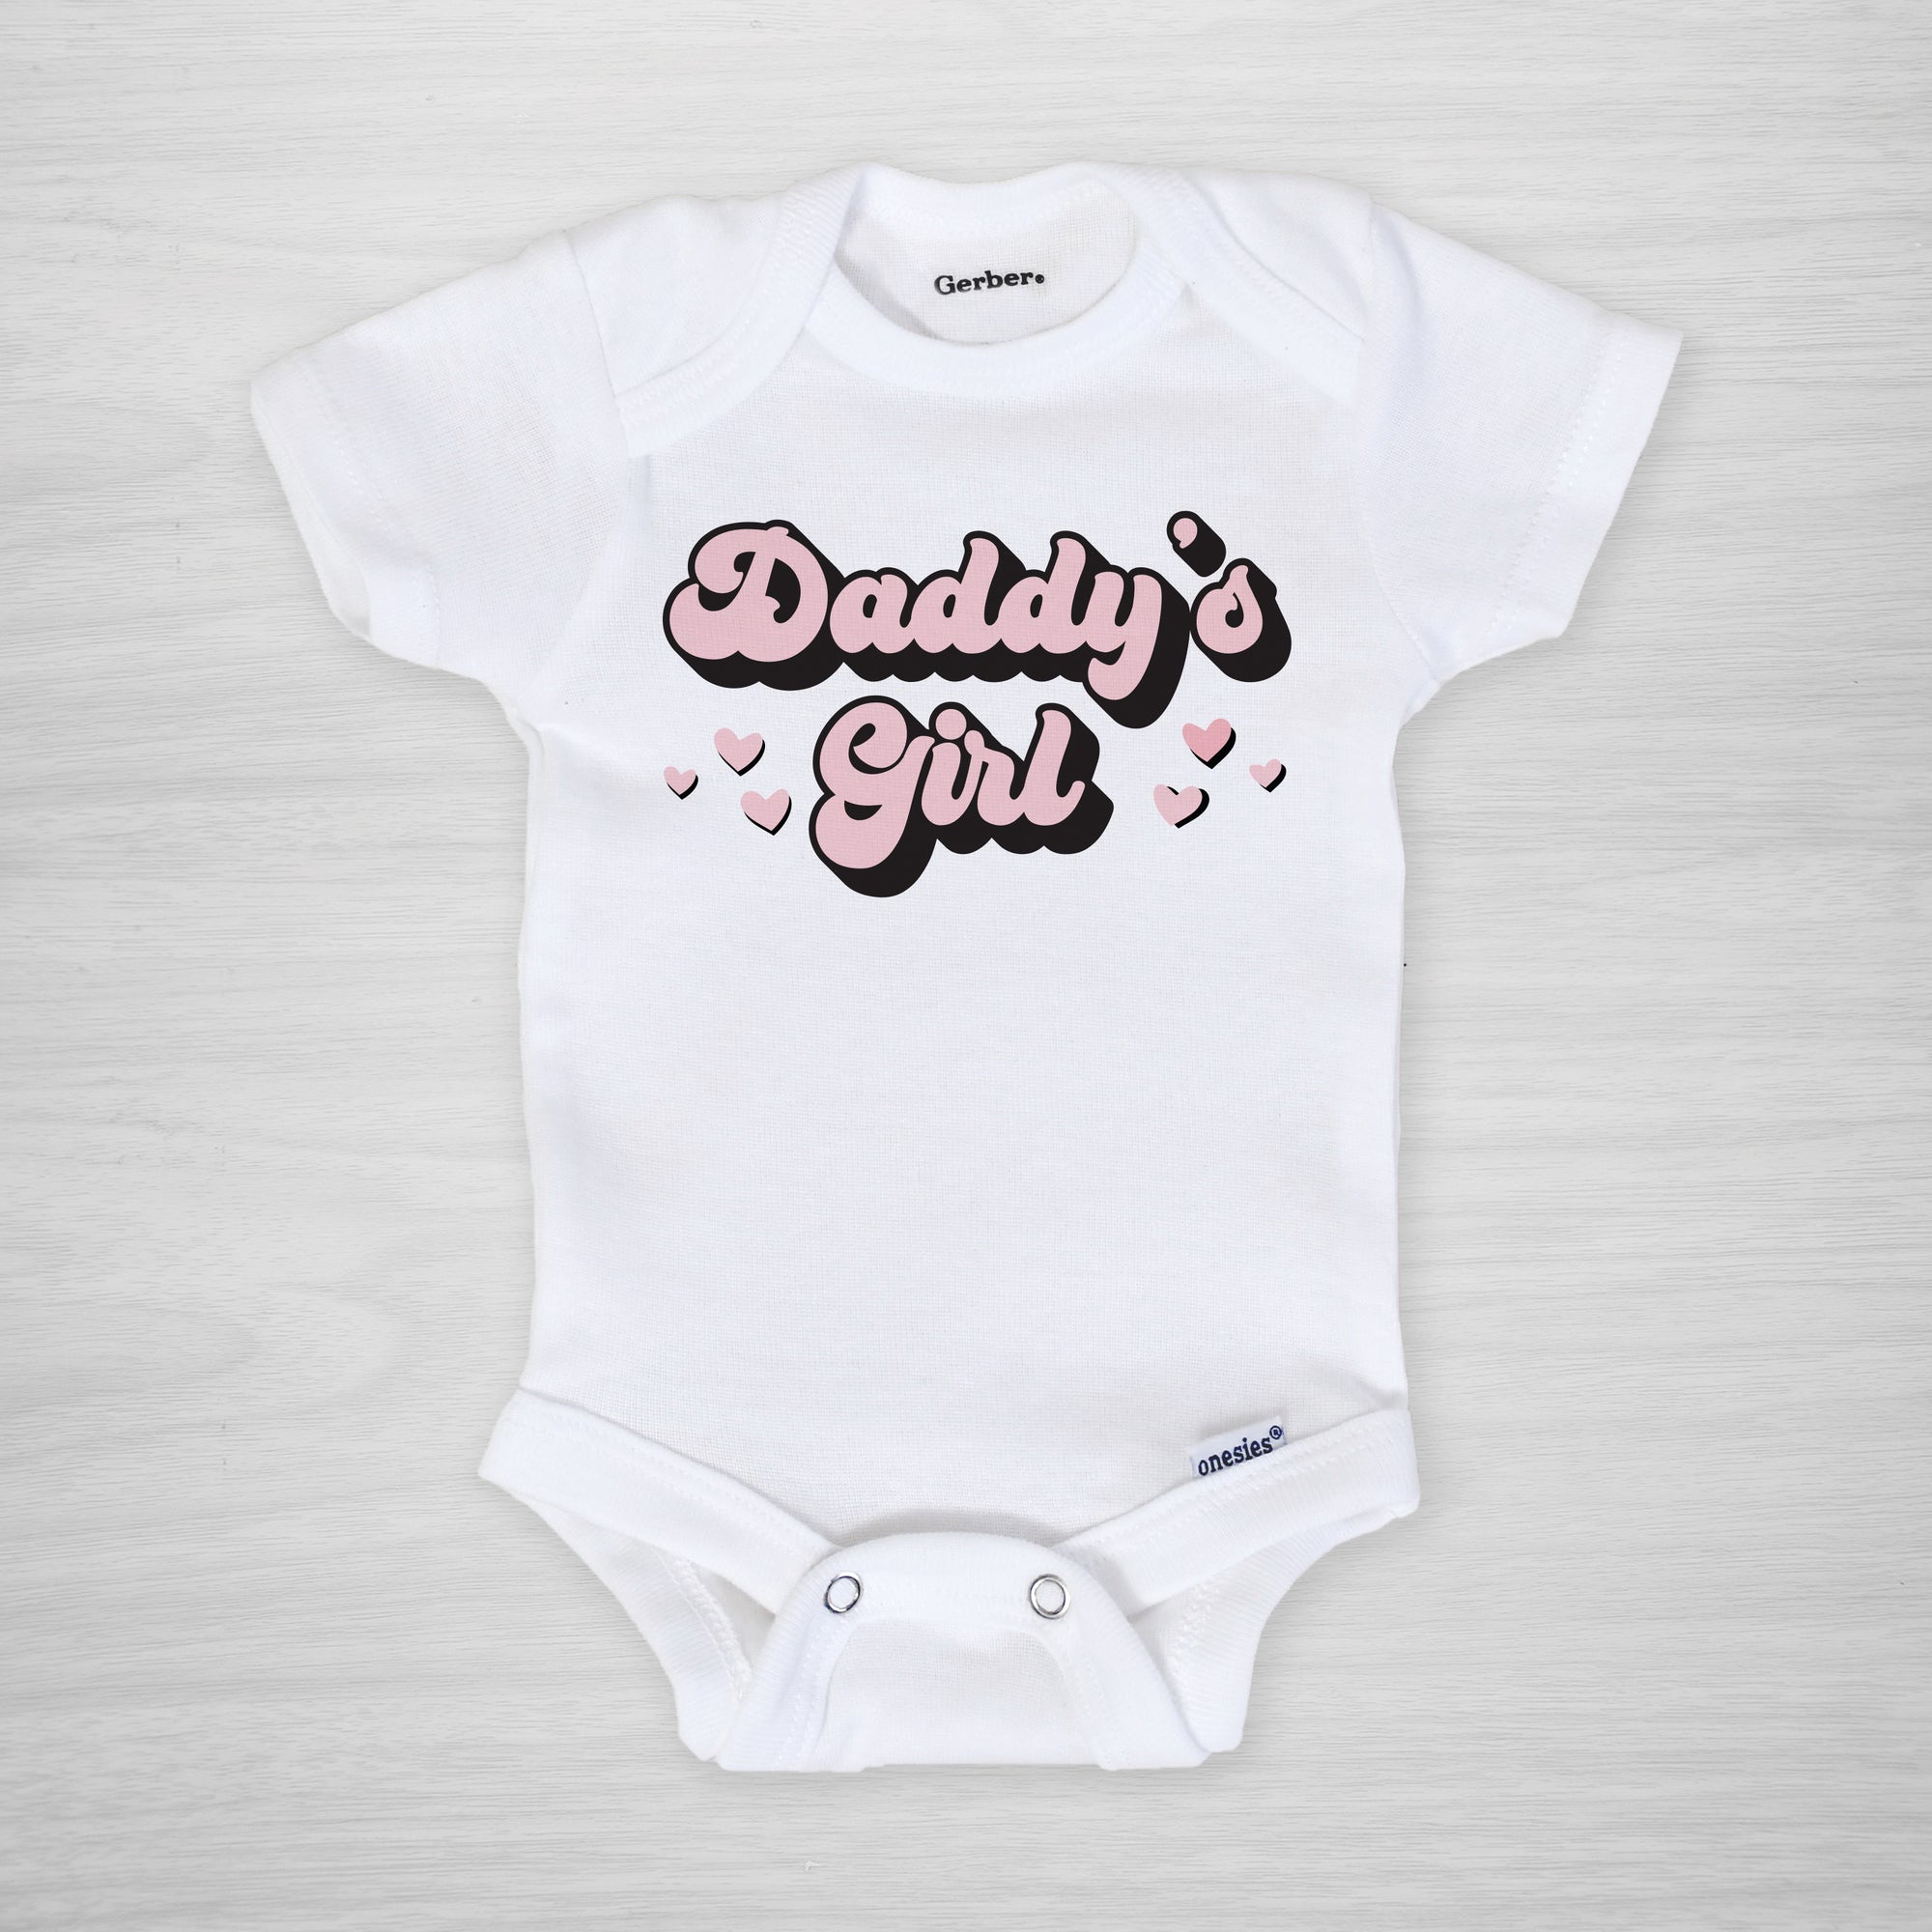 Let your little one show off their daddy pride with this special Daddy's Girl Onesie®! This comfy onesie is perfect for Daddy's Girl on Father's Day or any day! It's sure to bring a smile to dad’s face. (And if it doesn't, it's at least an adorable photo opp!)